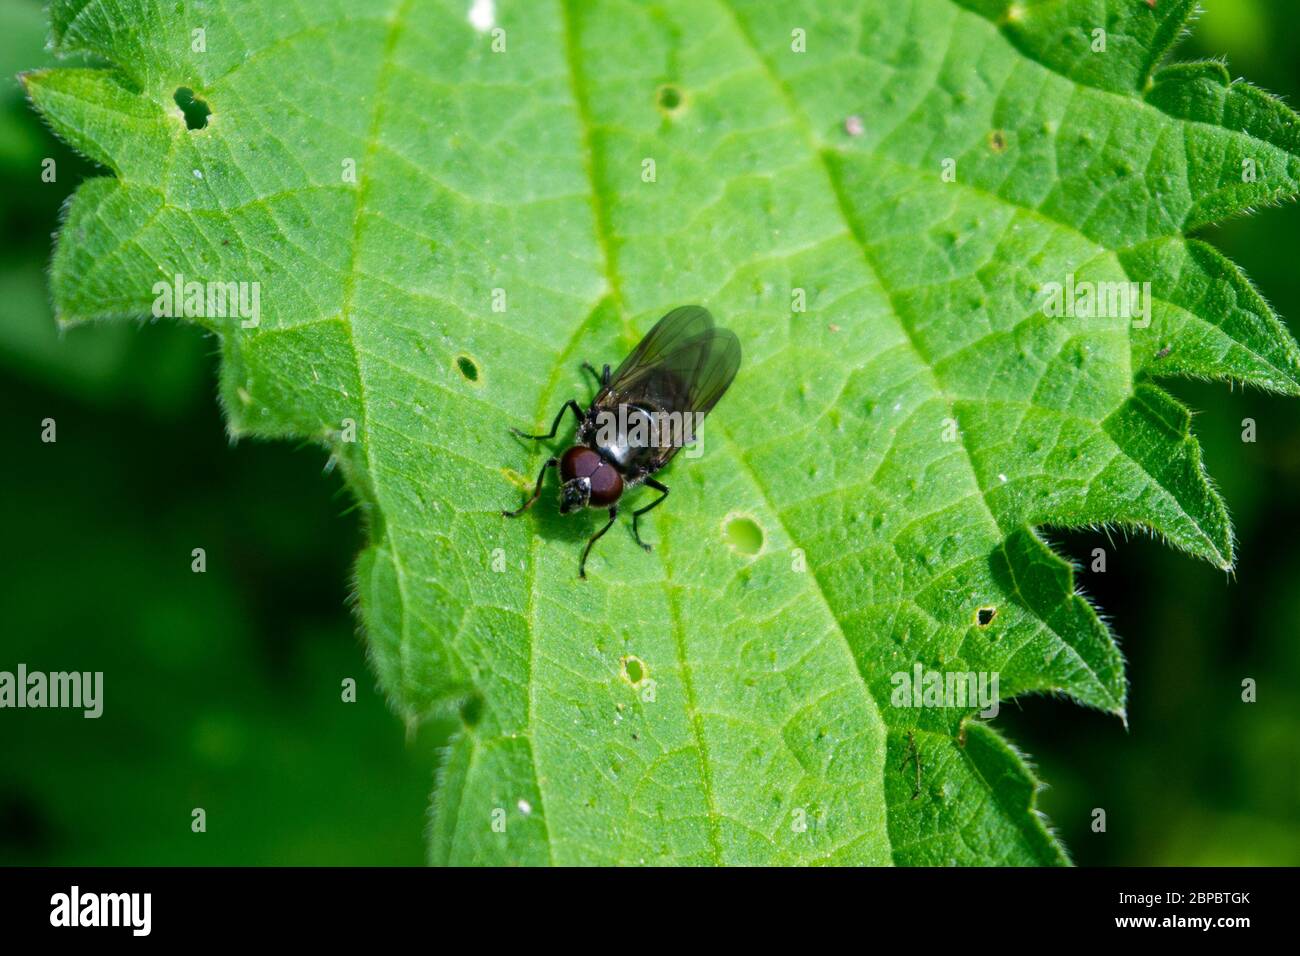 A hoverfly of the genus Platycheirus at rest on a stinging nettle leaf Urtica dioica Stock Photo